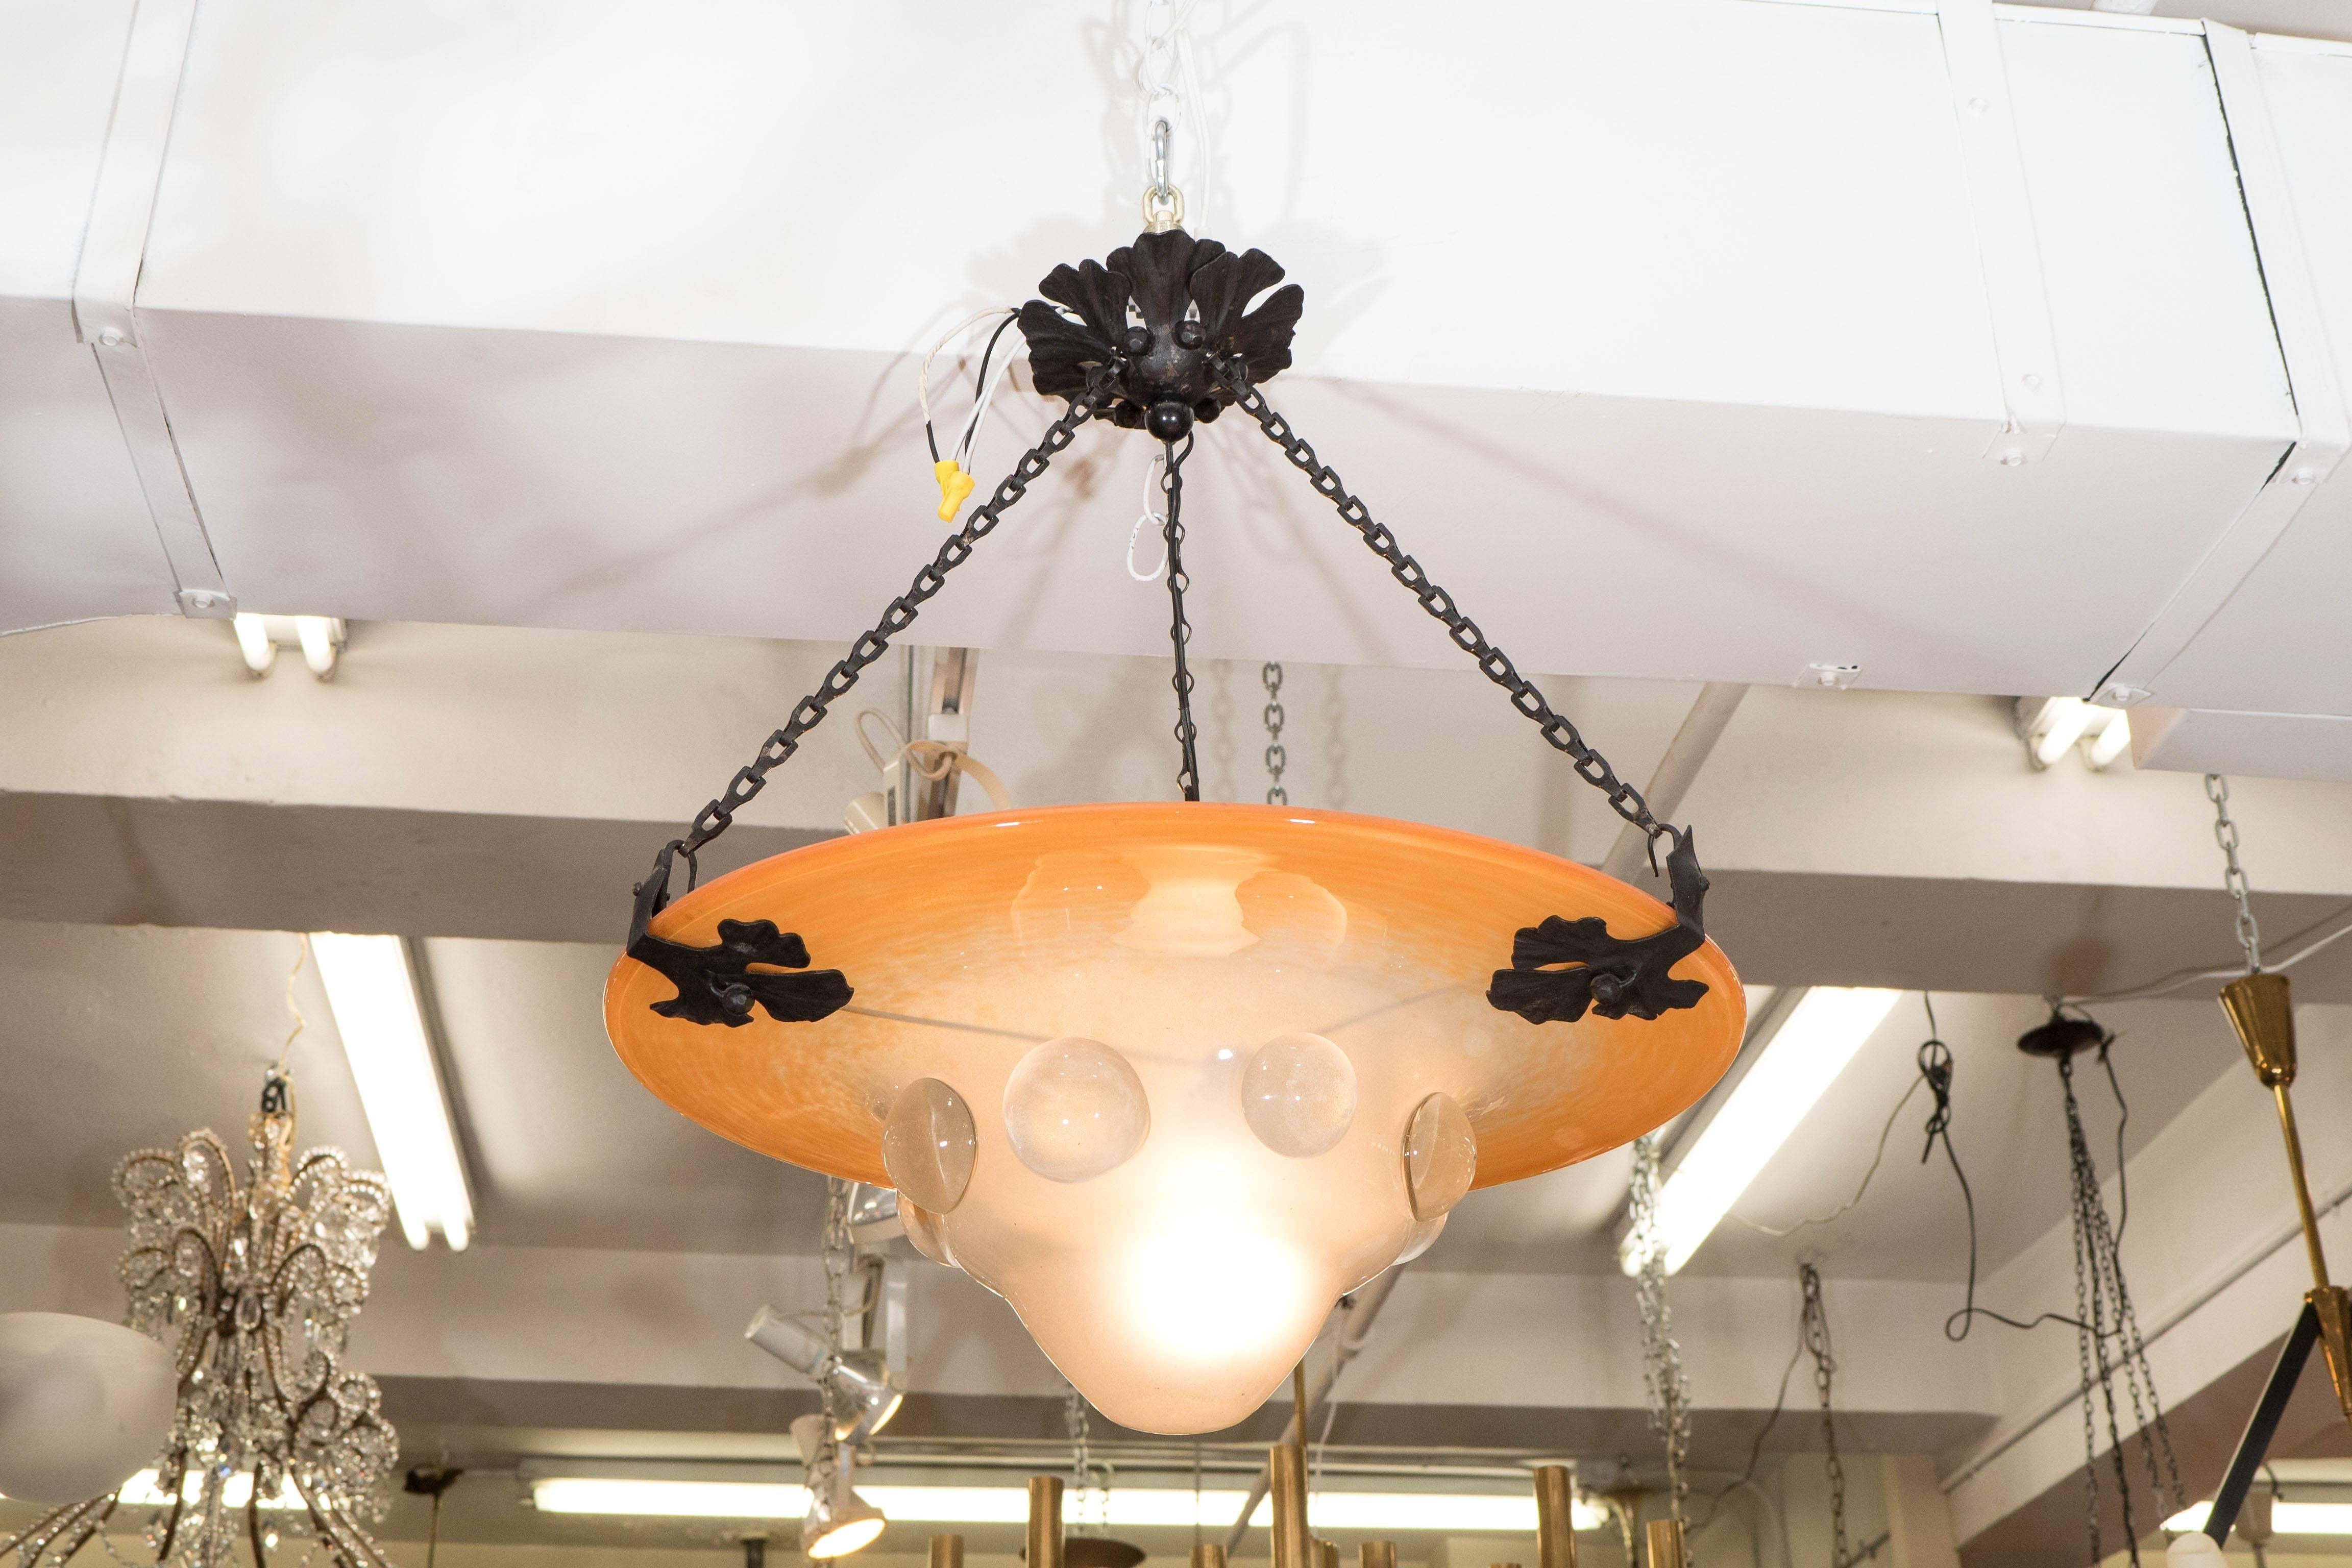 A vintage French Art Nouveau style chandelier, produced circa 1920s-1930s by Schneider Glass, with convex glass shade in ombre tones of mottled peach to frosted white, decorated with clear globes, suspended by three wrought iron chains, the support